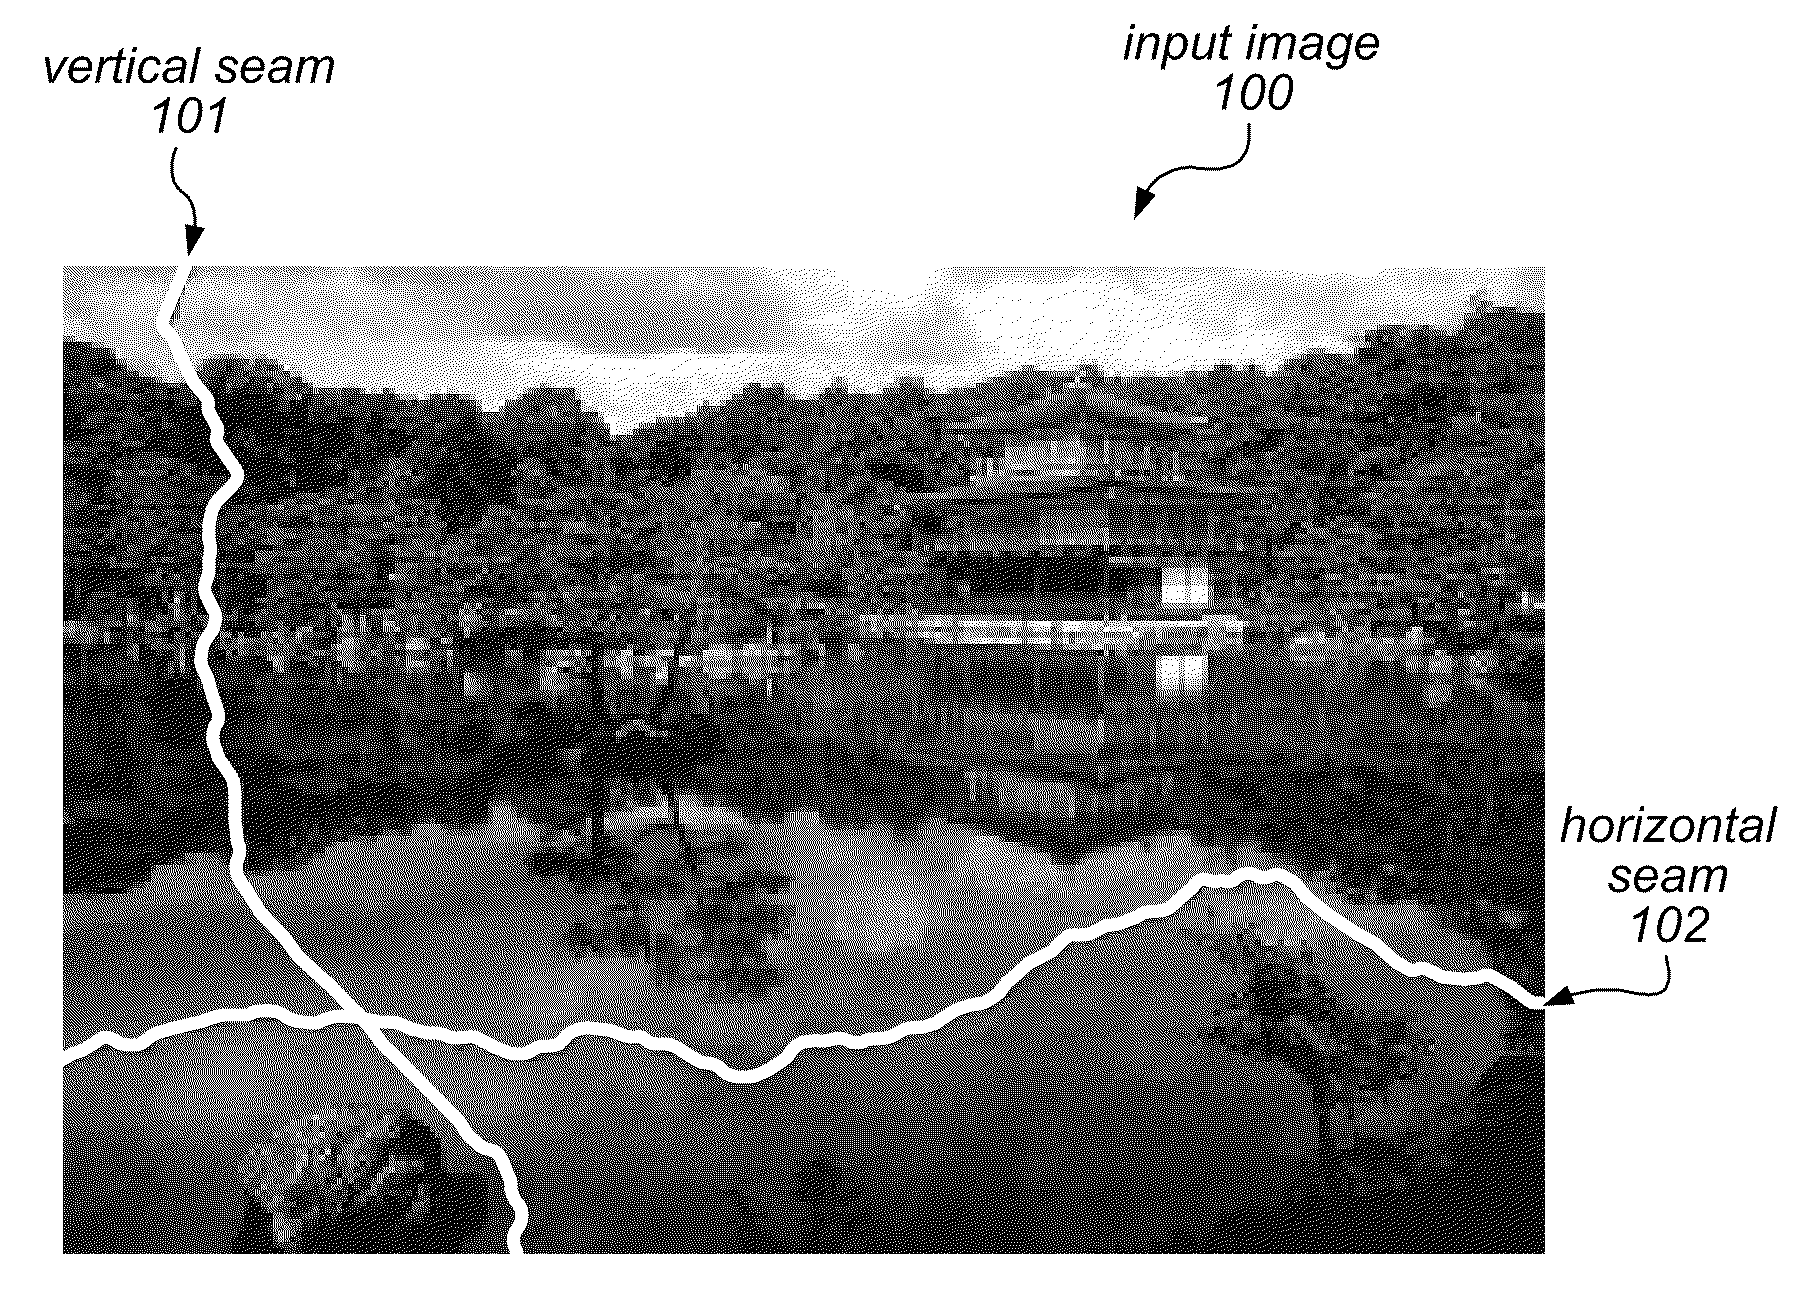 System and Method for Content Aware Hybrid Cropping and Seam Carving of Images